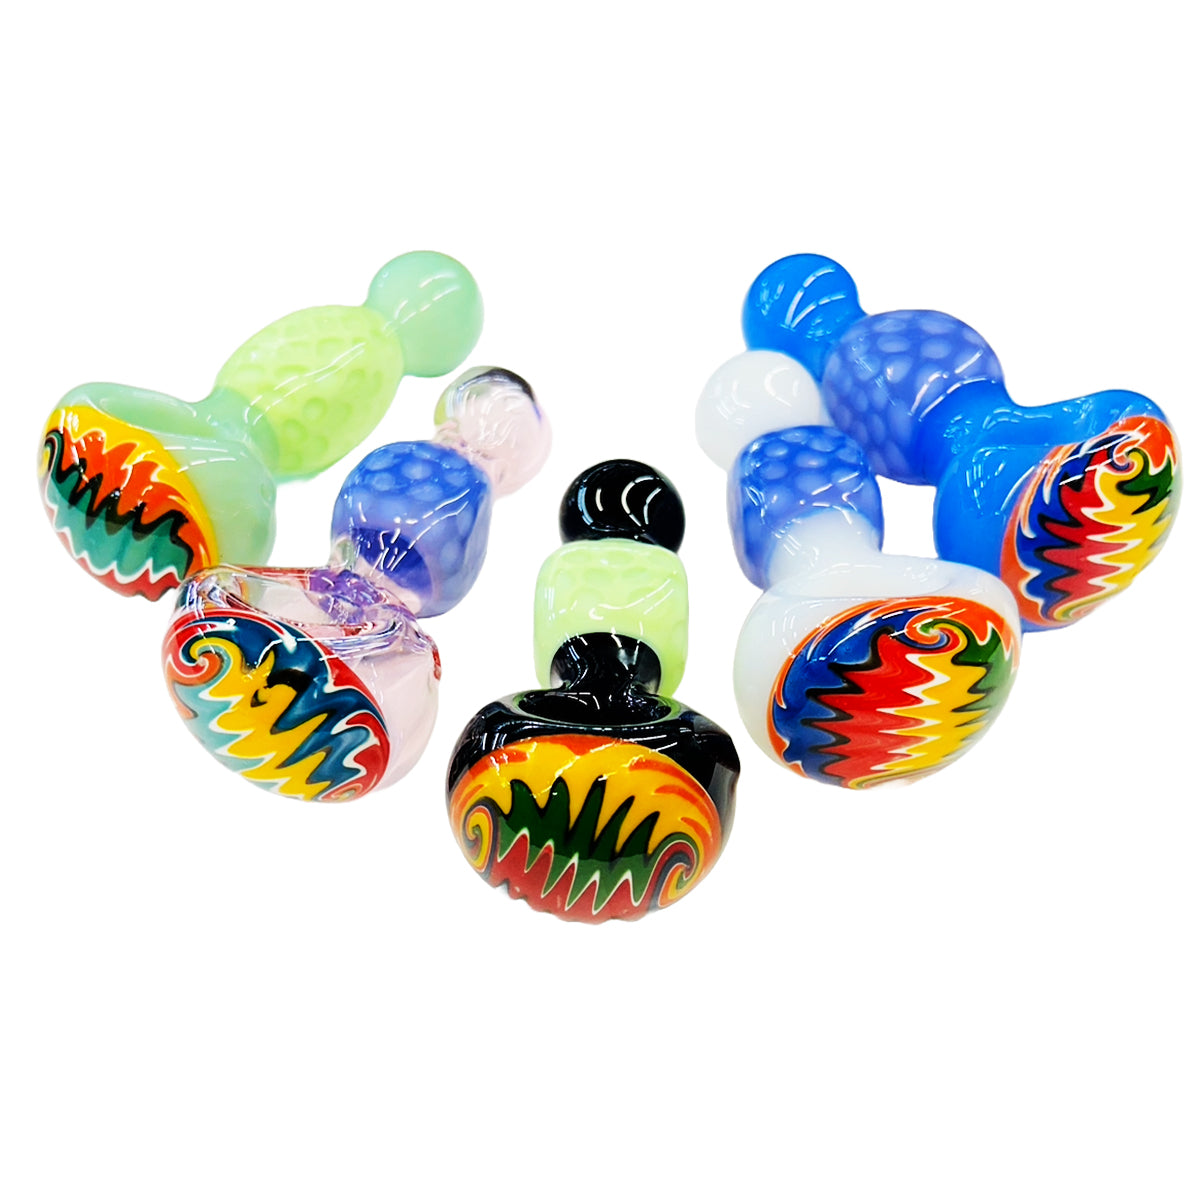 4.5" Hand Pipe Spoon Reversal Glass Art with Honeycomb Design